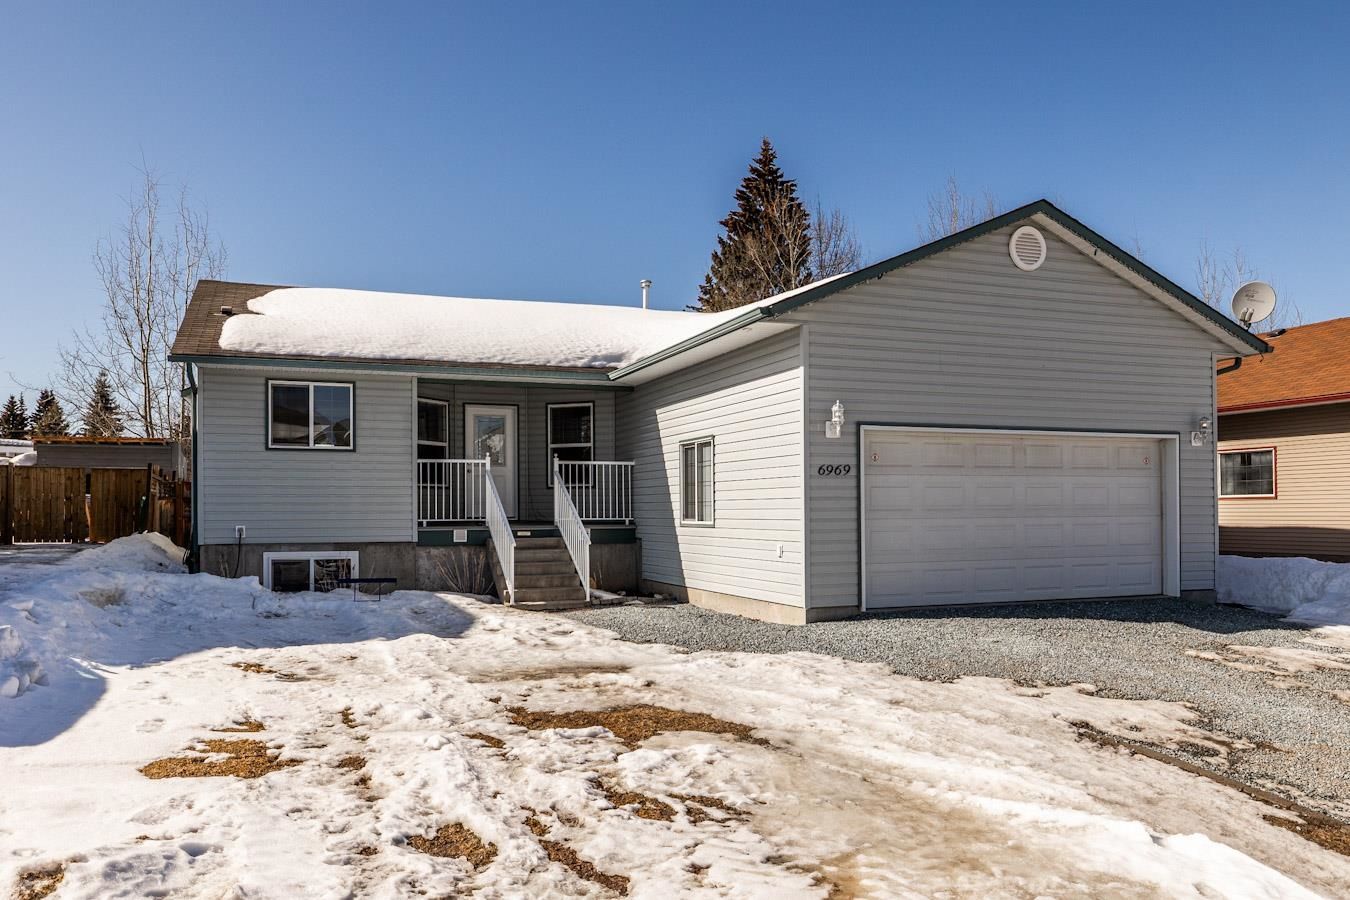 Open House. Open House on Sunday, March 26, 2023 12:30PM - 1:30PM